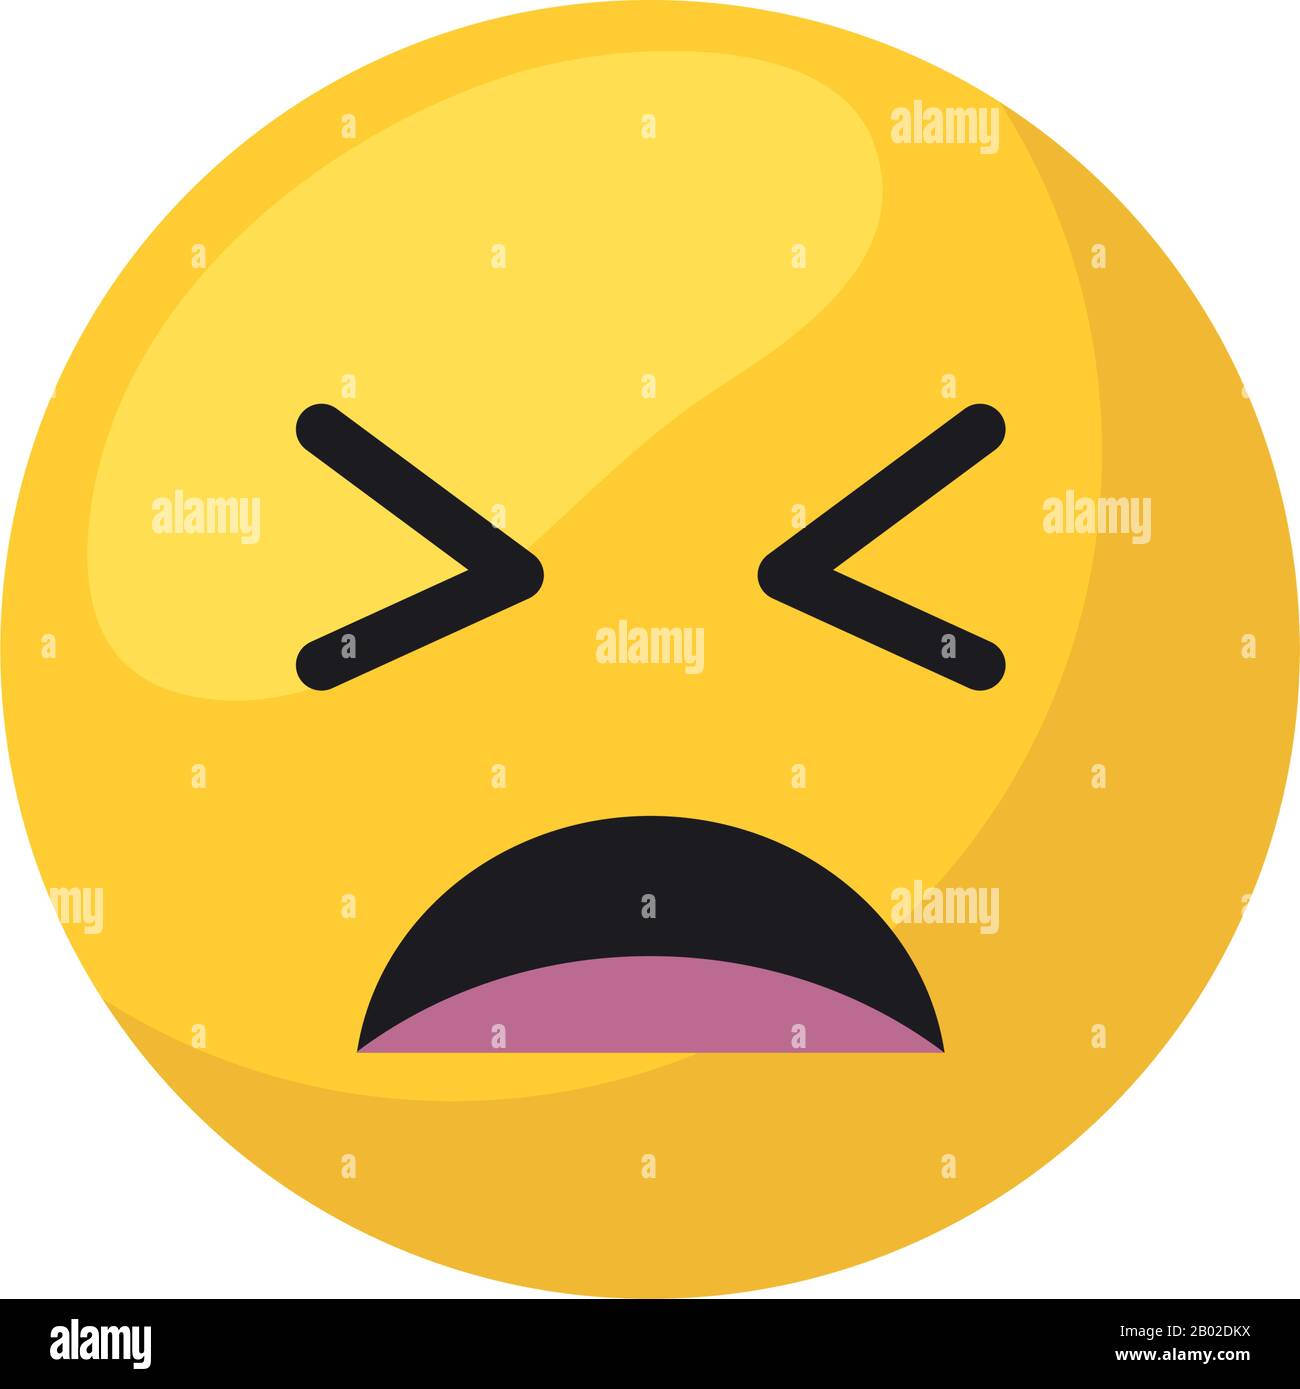 Frustrated emoji face flat style icon design, Cartoon expression cute emoticon character profile facial toy adorable and social media theme Vector illustration Stock Vector